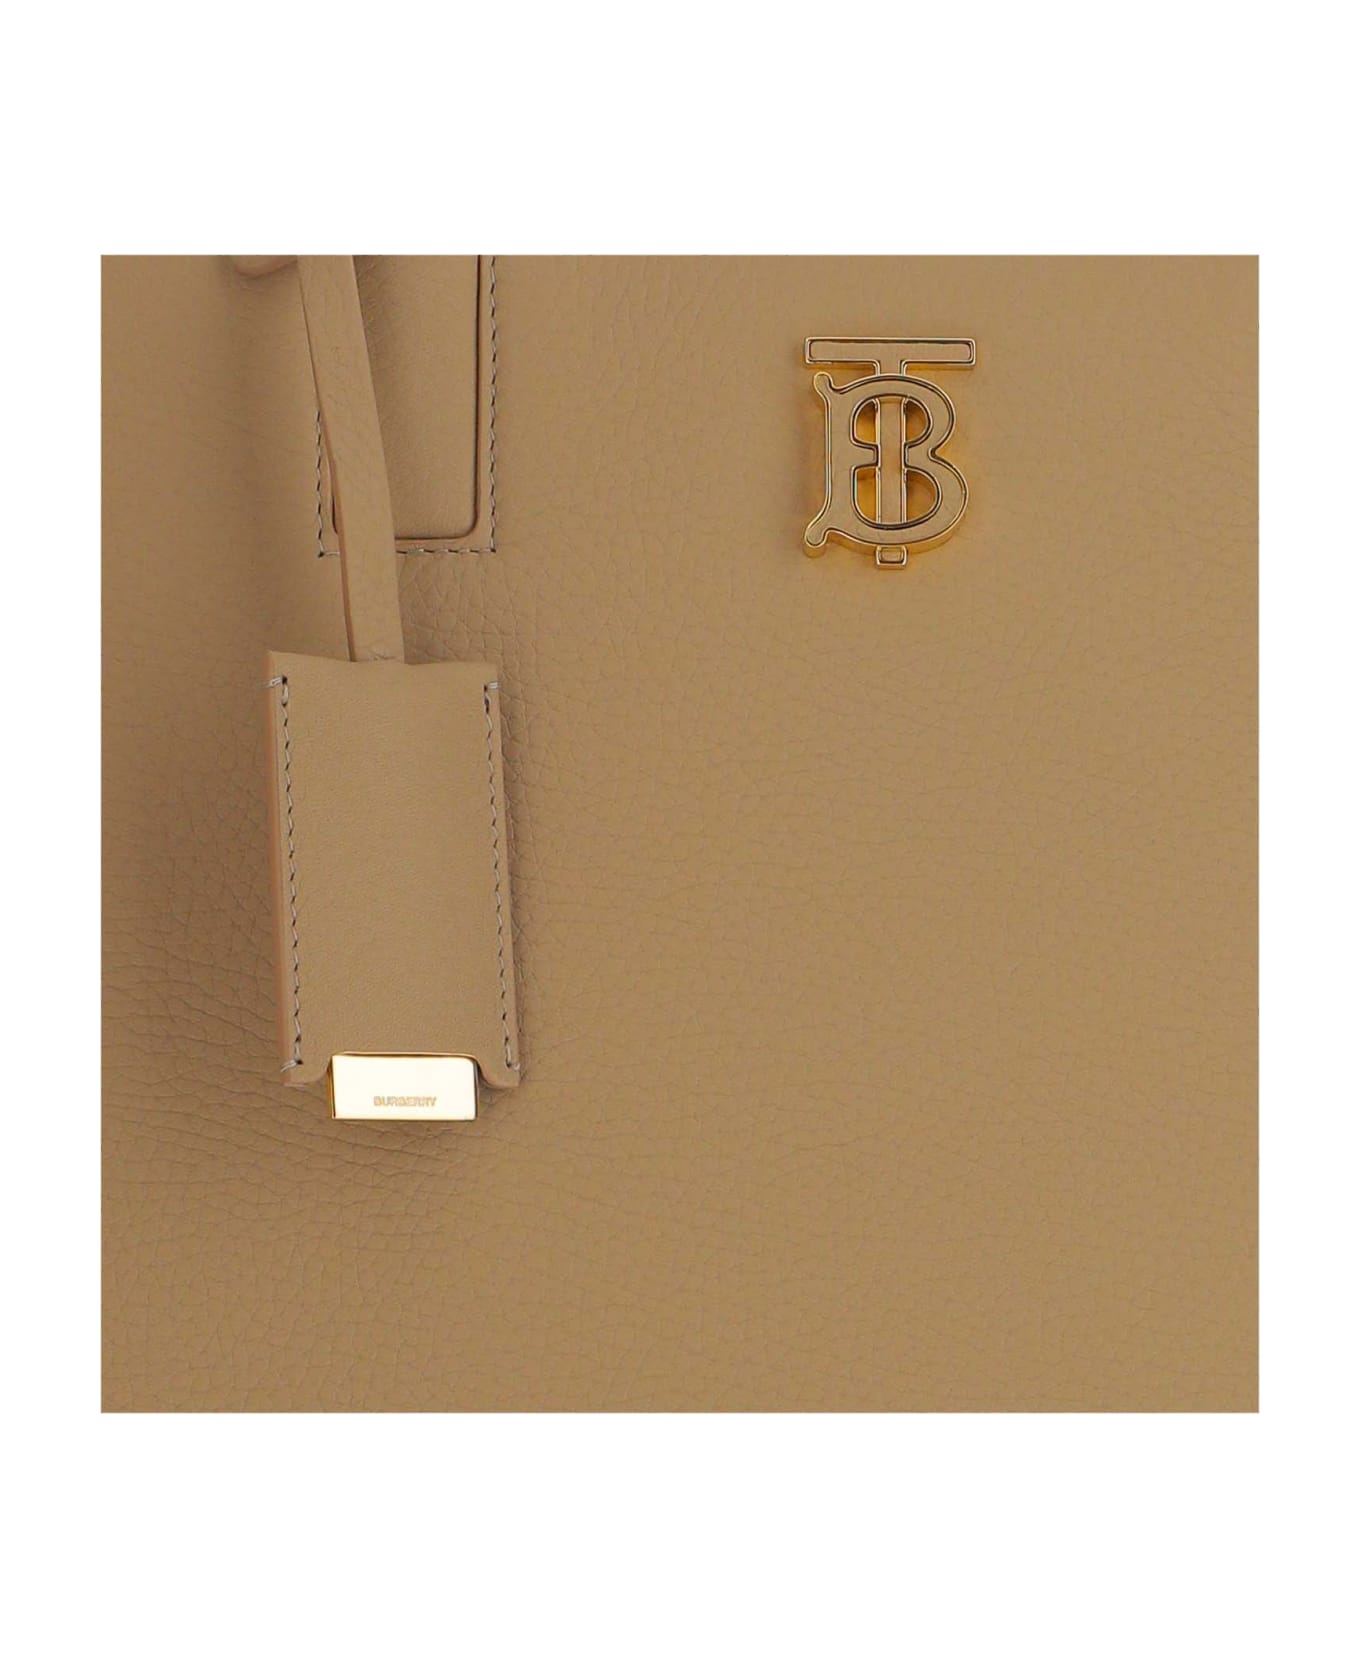 Burberry Frances Small Tote Bag - Beige トートバッグ